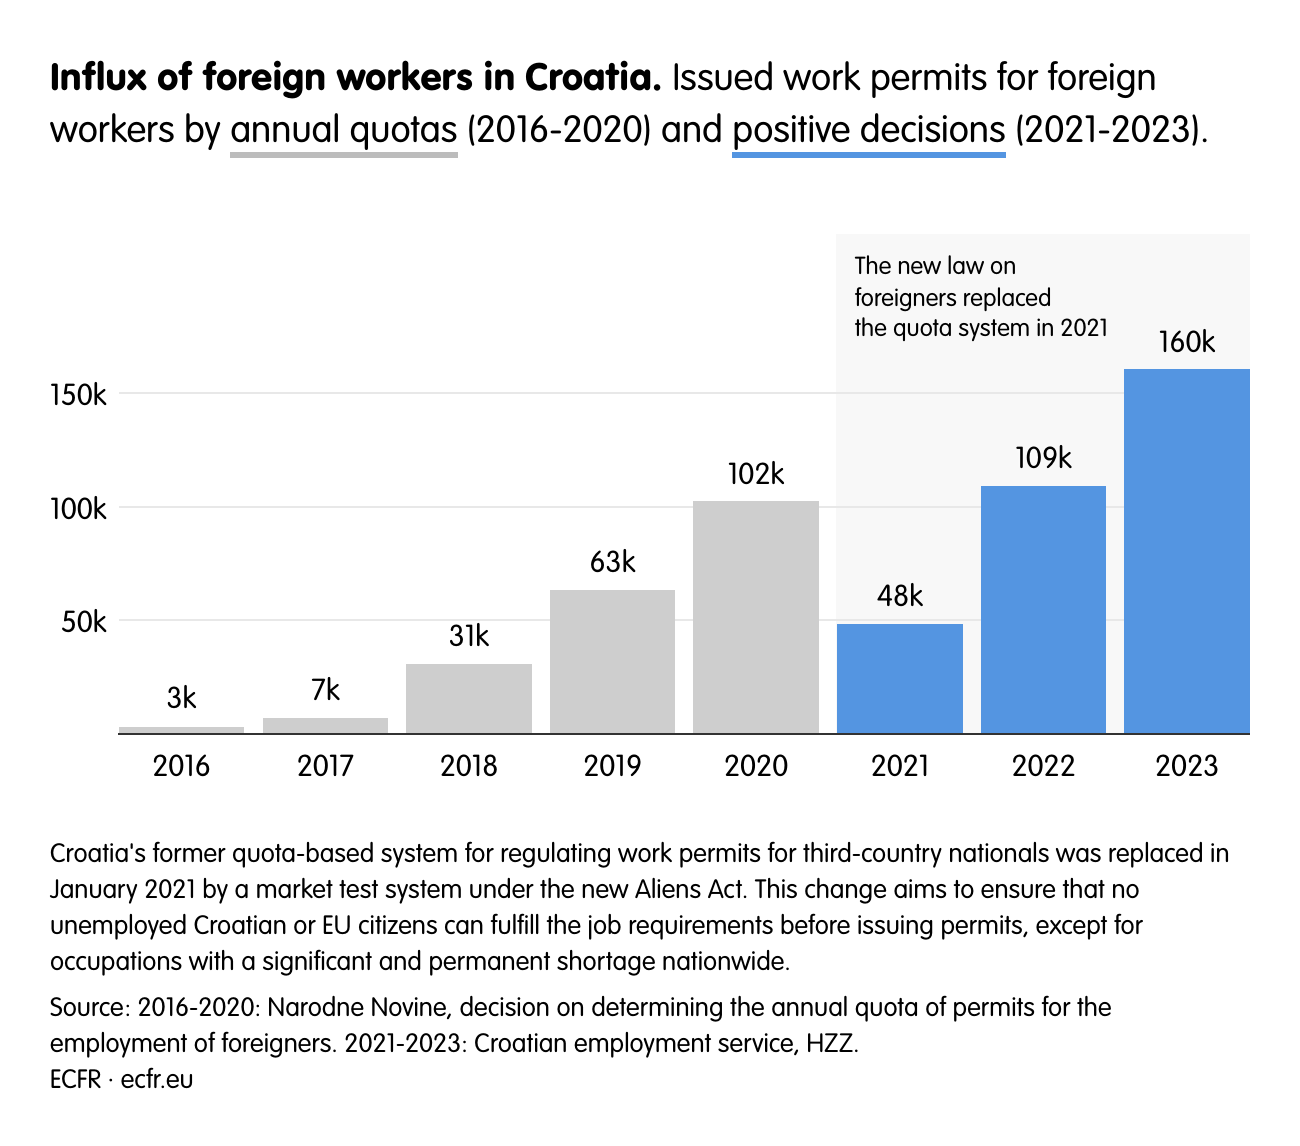 Influx of foreign workers in Croatia.